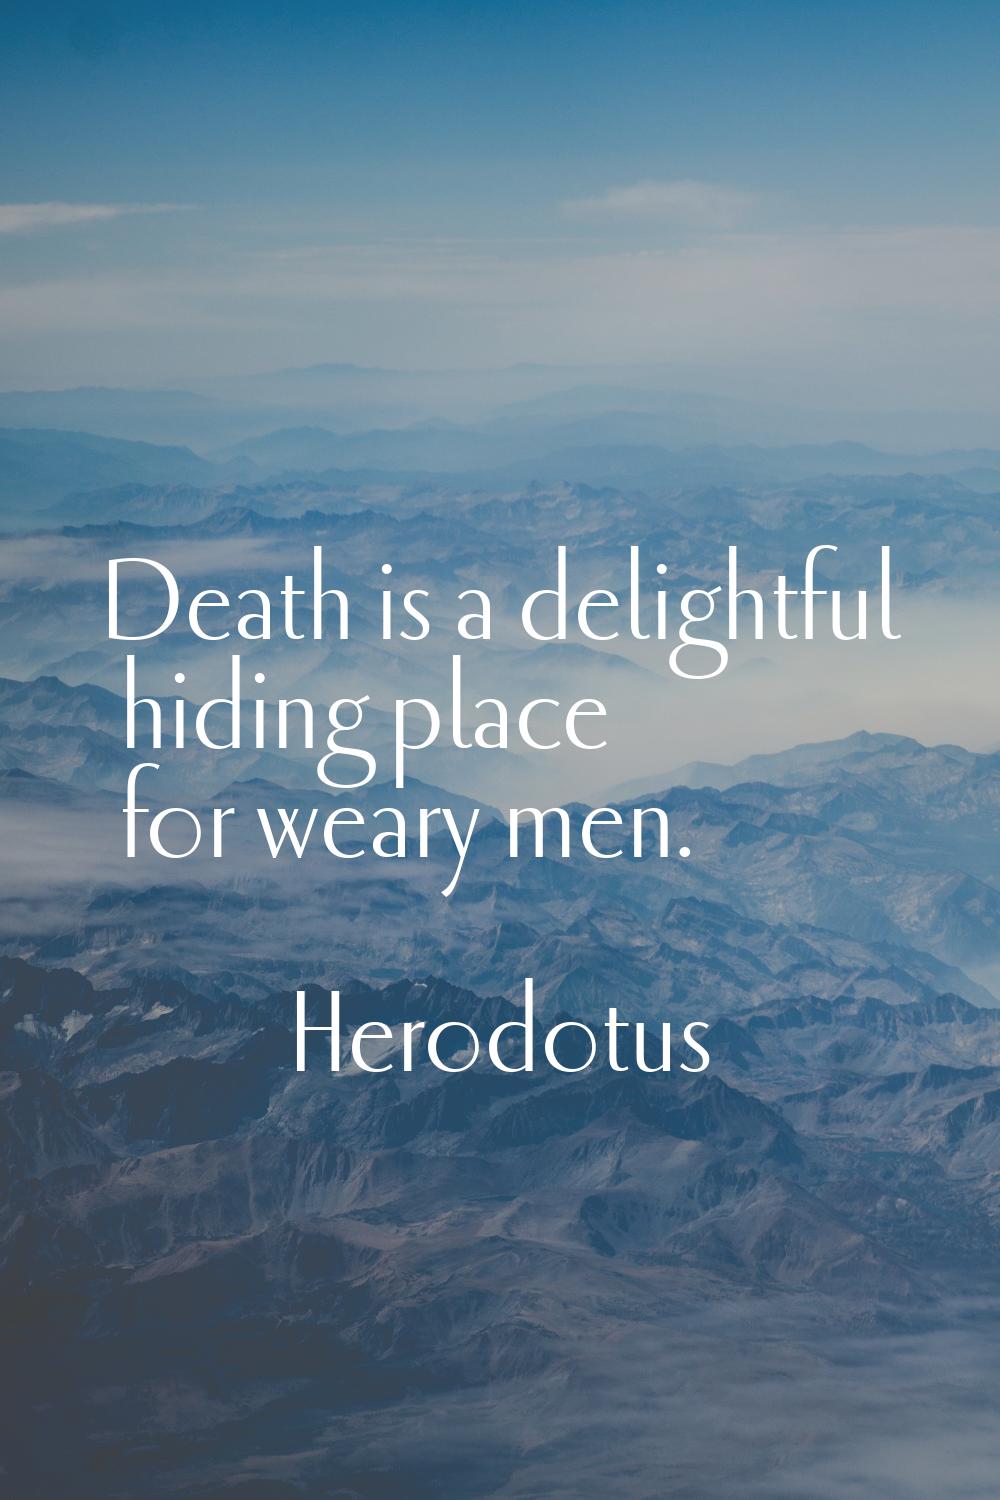 Death is a delightful hiding place for weary men.